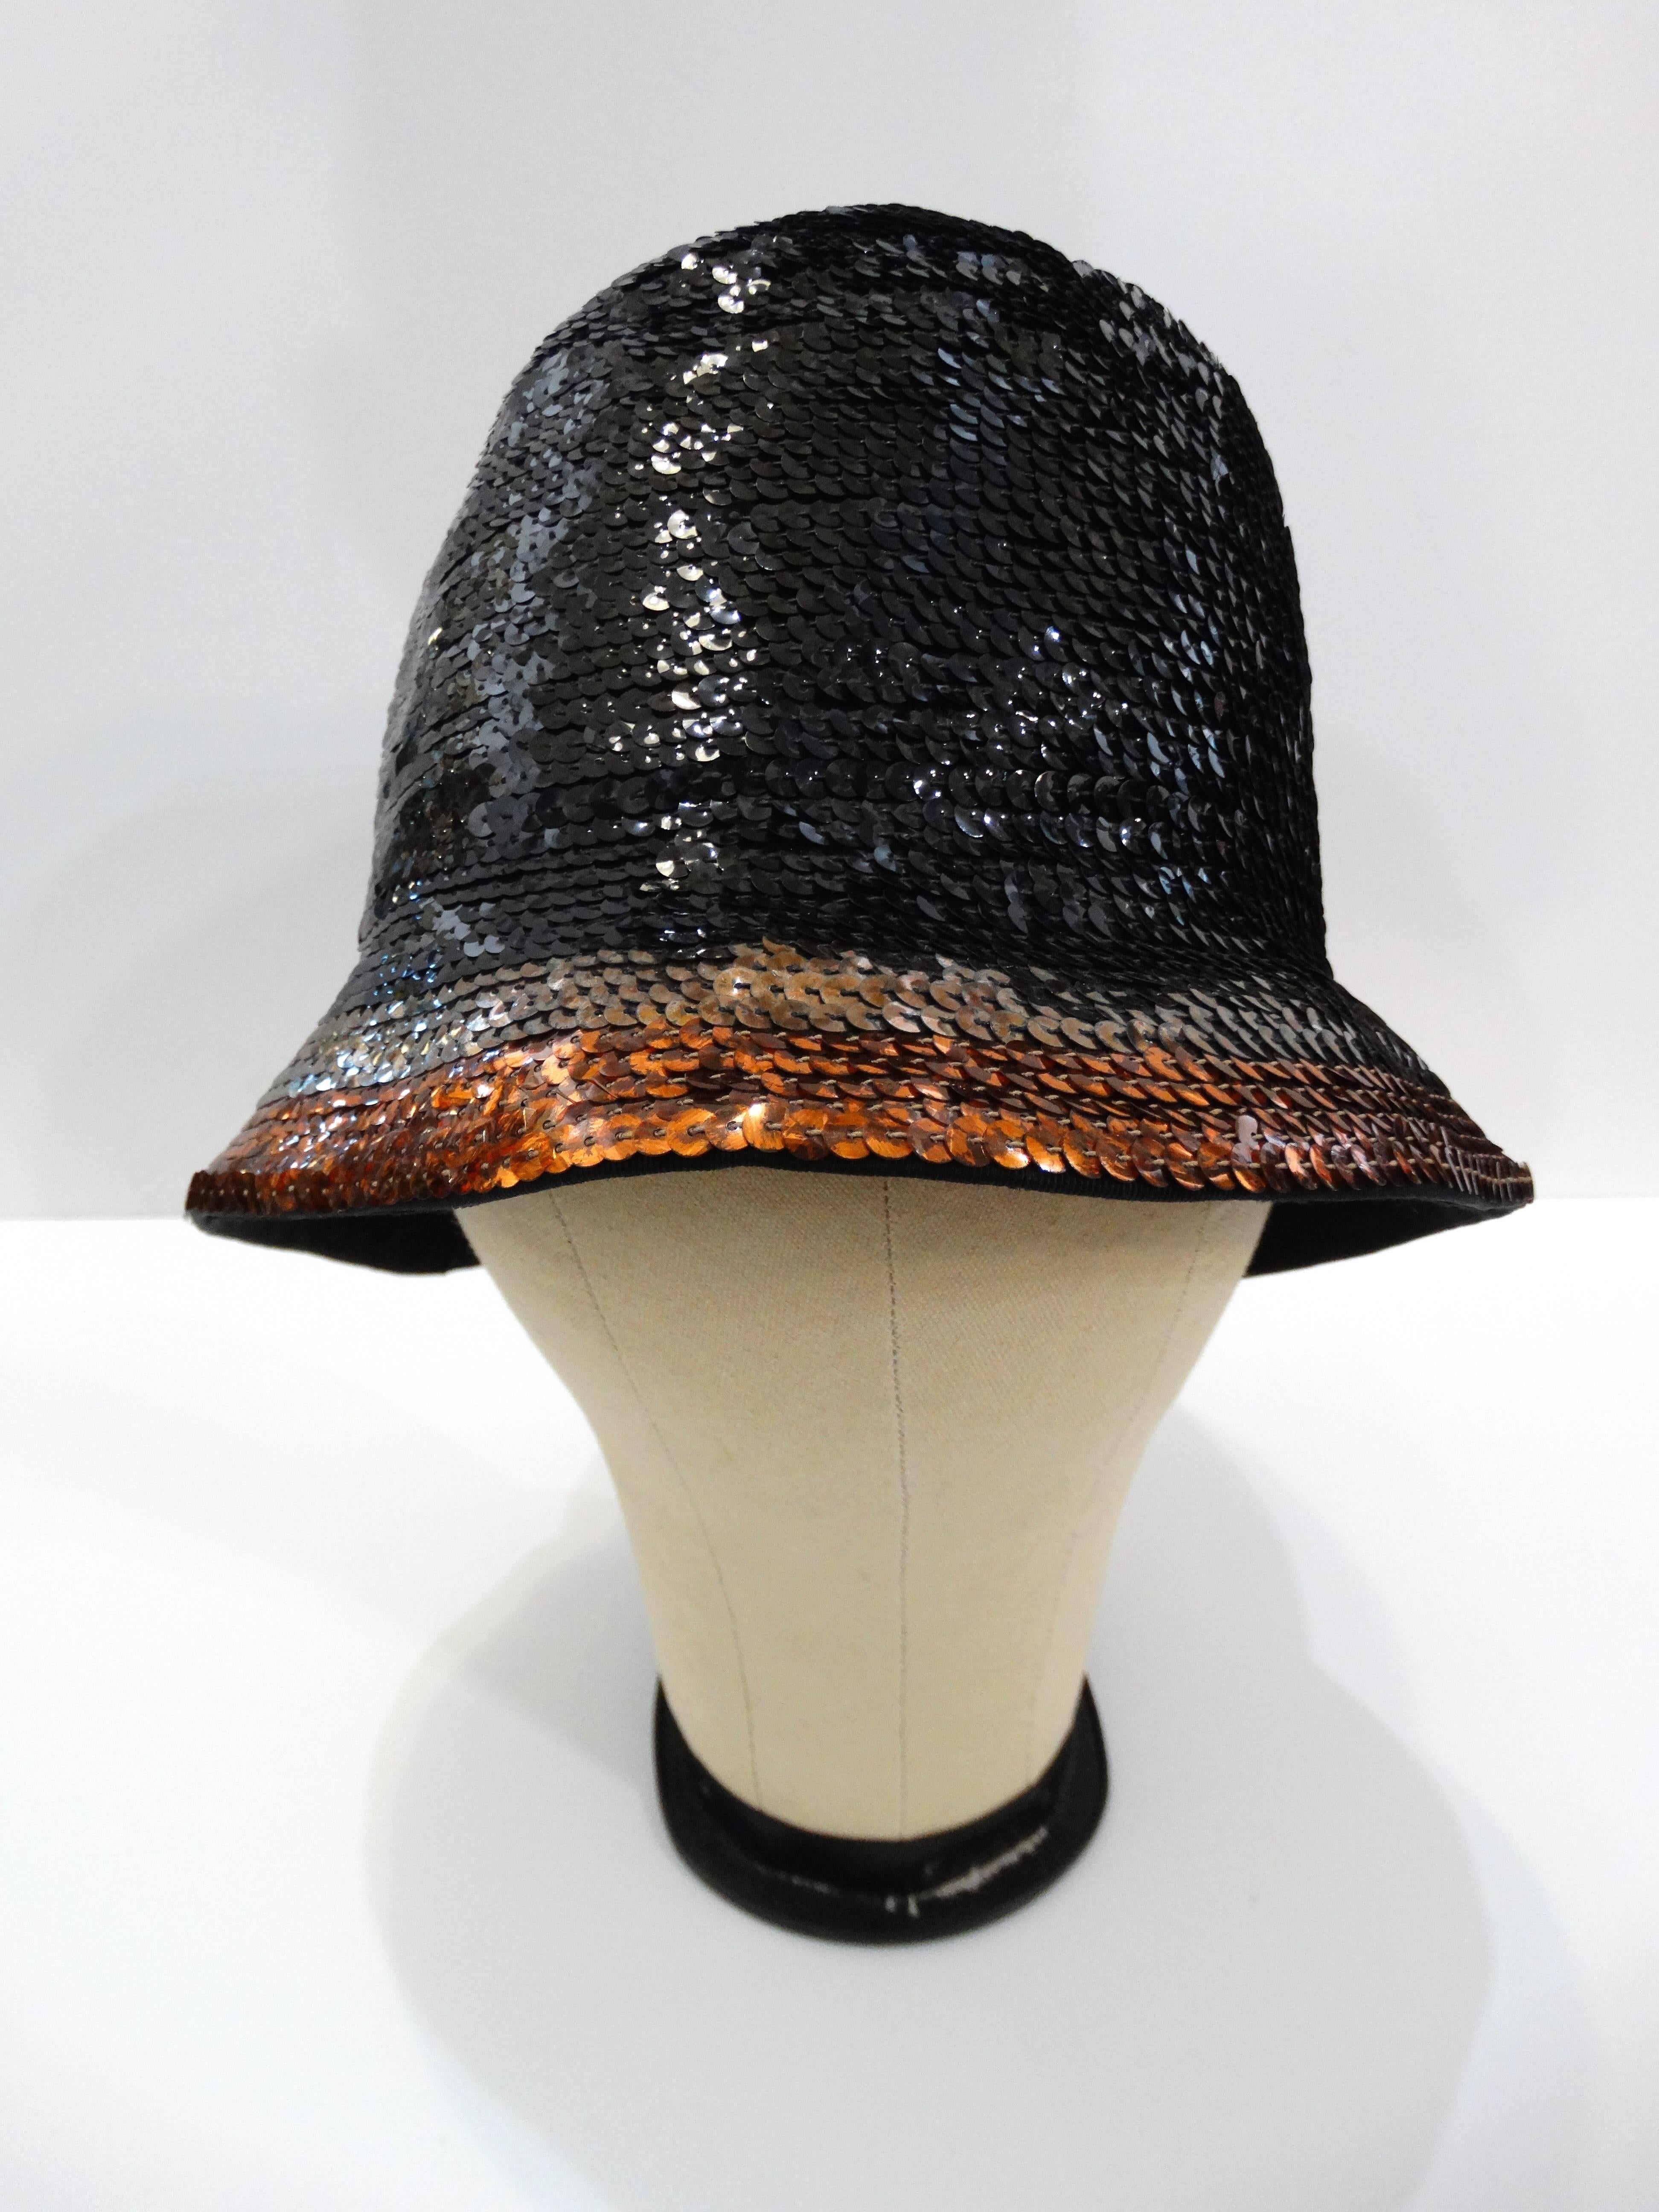 1970s ultra glam sequined hat by Yves Saint Laurent. Beautifully done in a black woven straw base that's fully covered in black sequins on the body and two wide stripes of metallic grey and copper colored sequins around the brim. Classic fedora